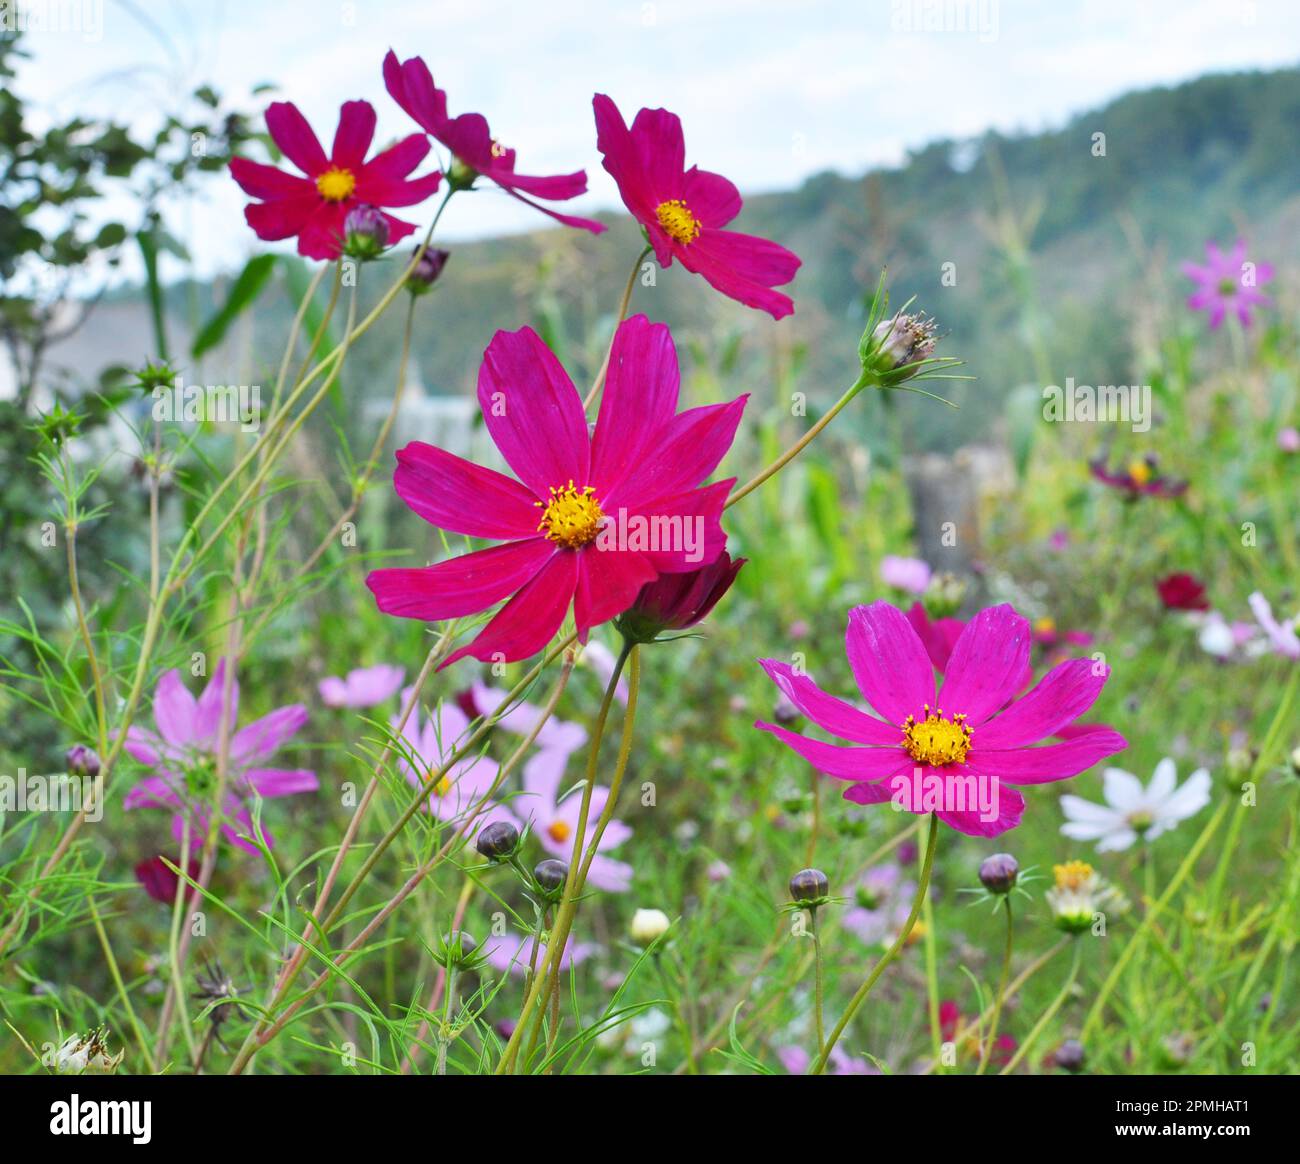 Decorative Cosmos flowers bloom in nature in the flower garden Stock Photo